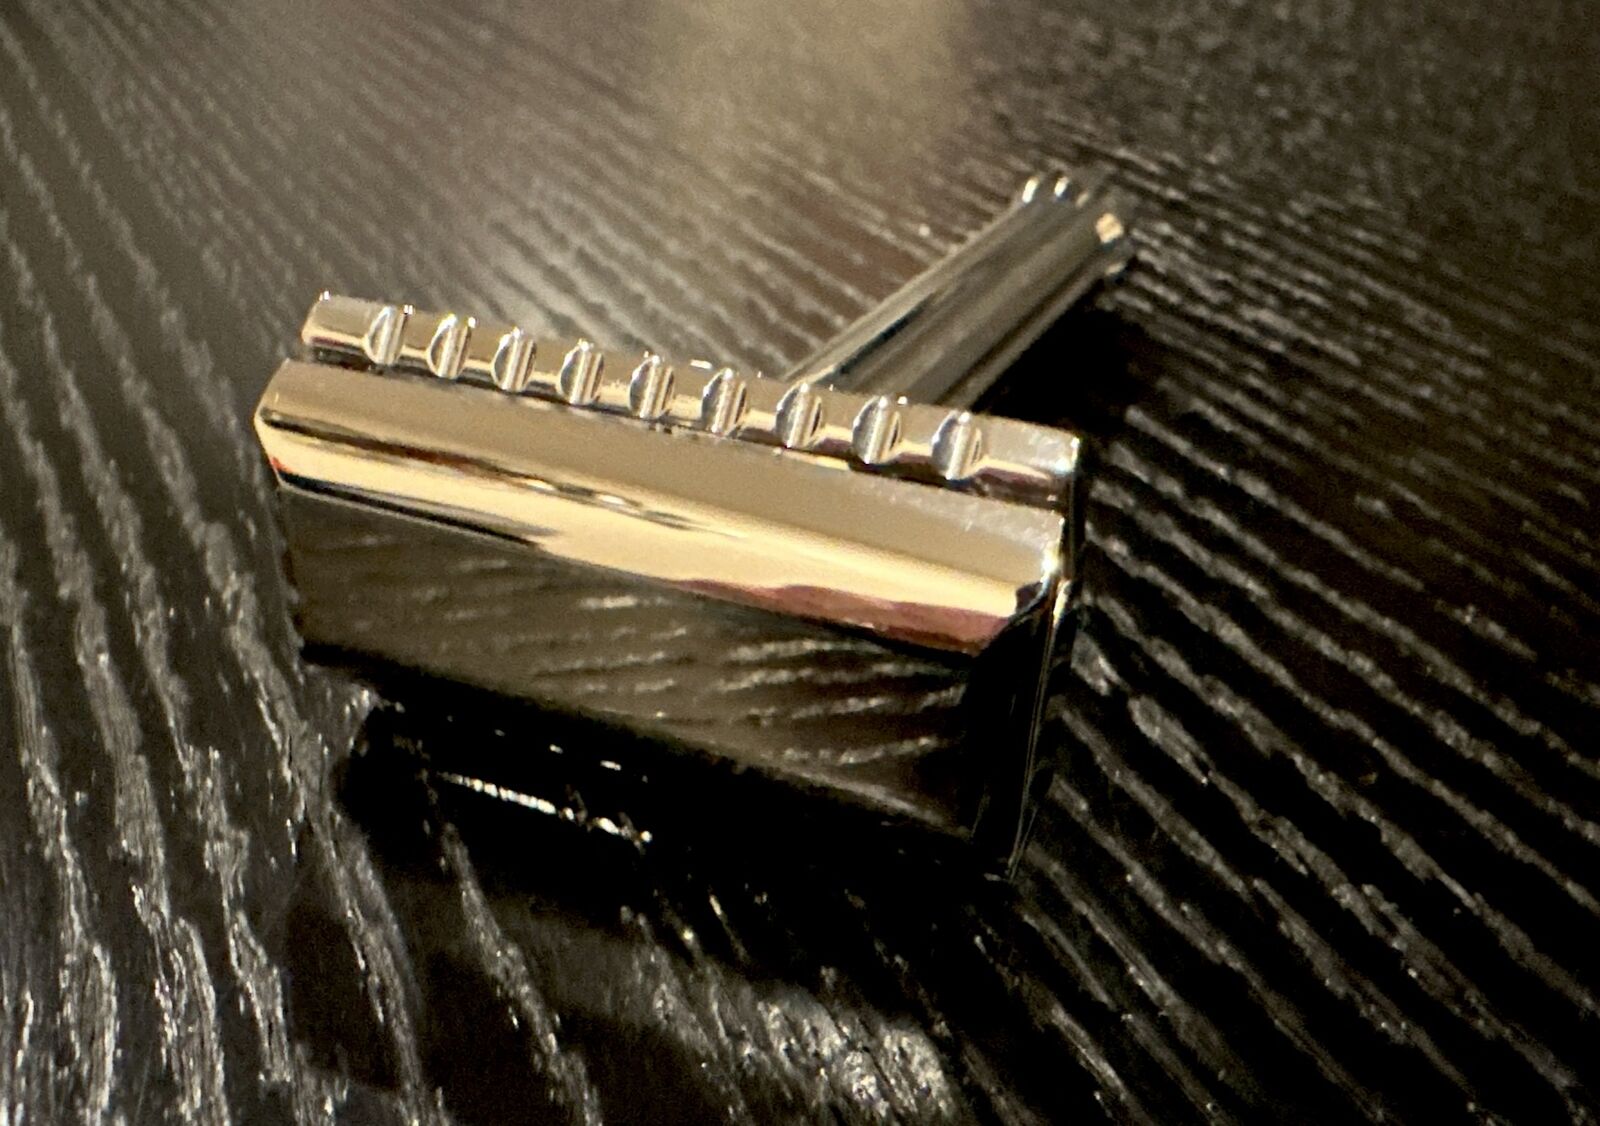 Blackland Blackbird Stainless Steel Safety Razor /Polished/No Stand/Towel